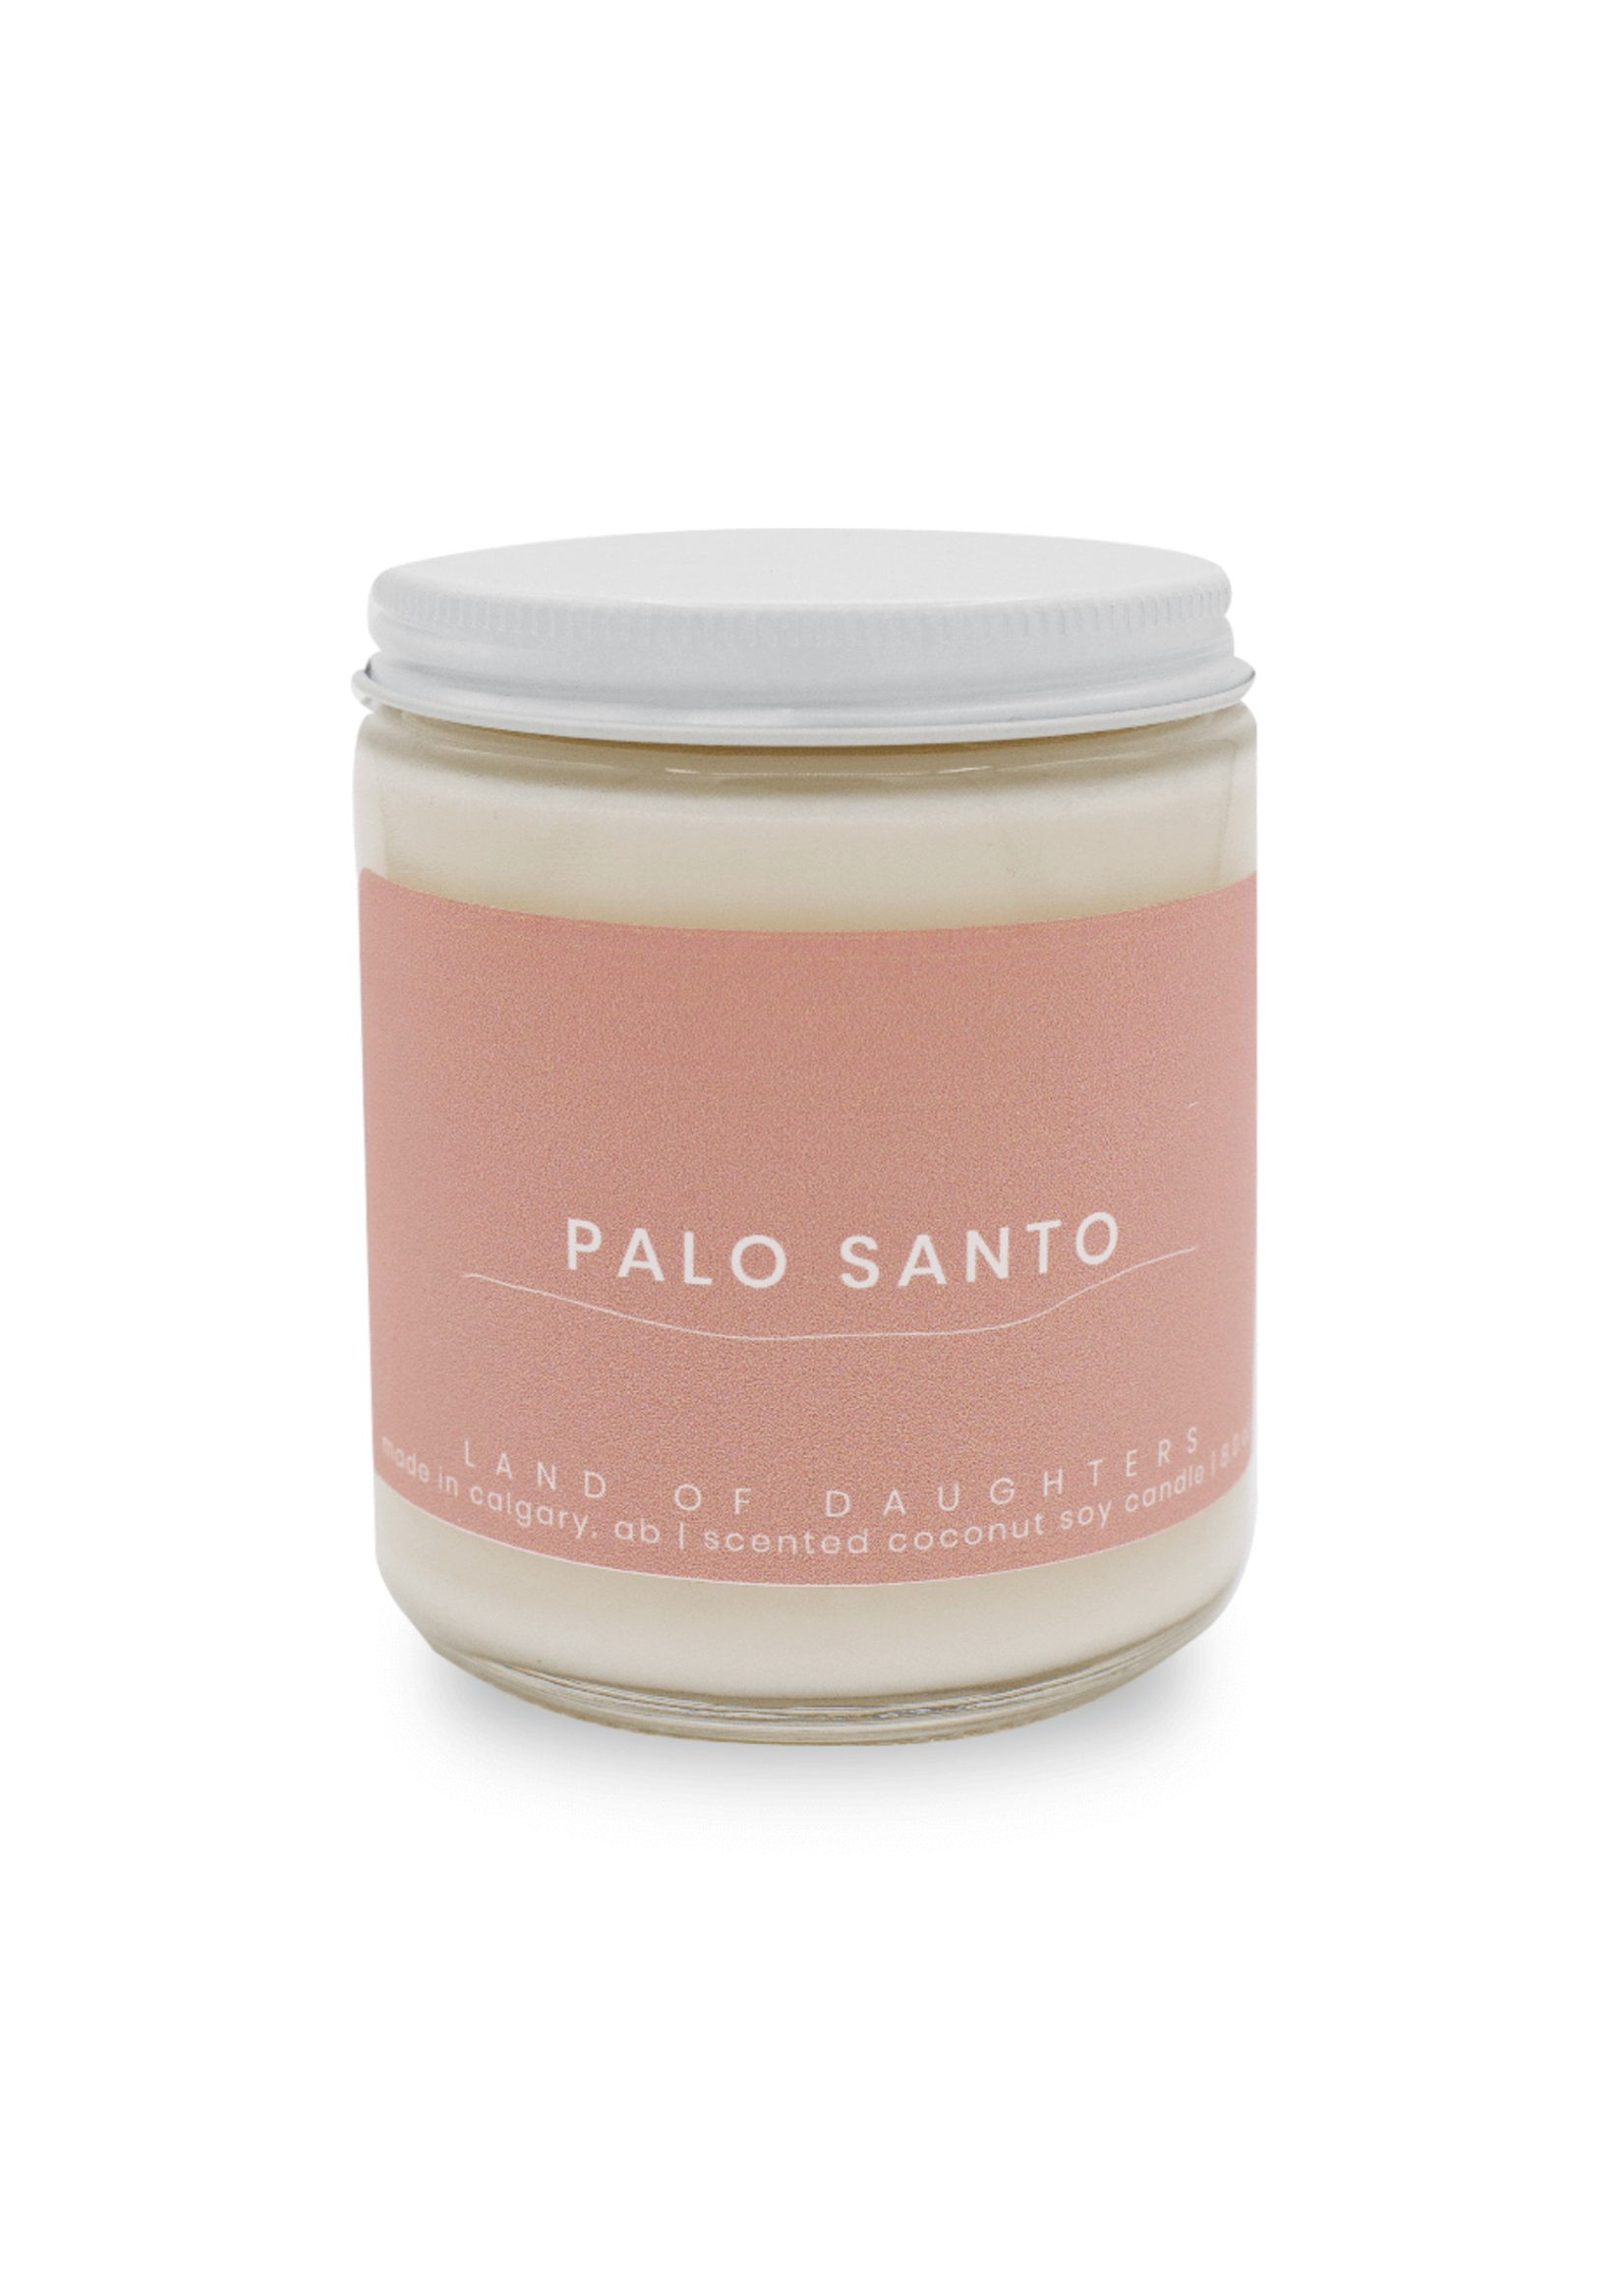 LAND of DAUGHTERS palo santo CANDLE